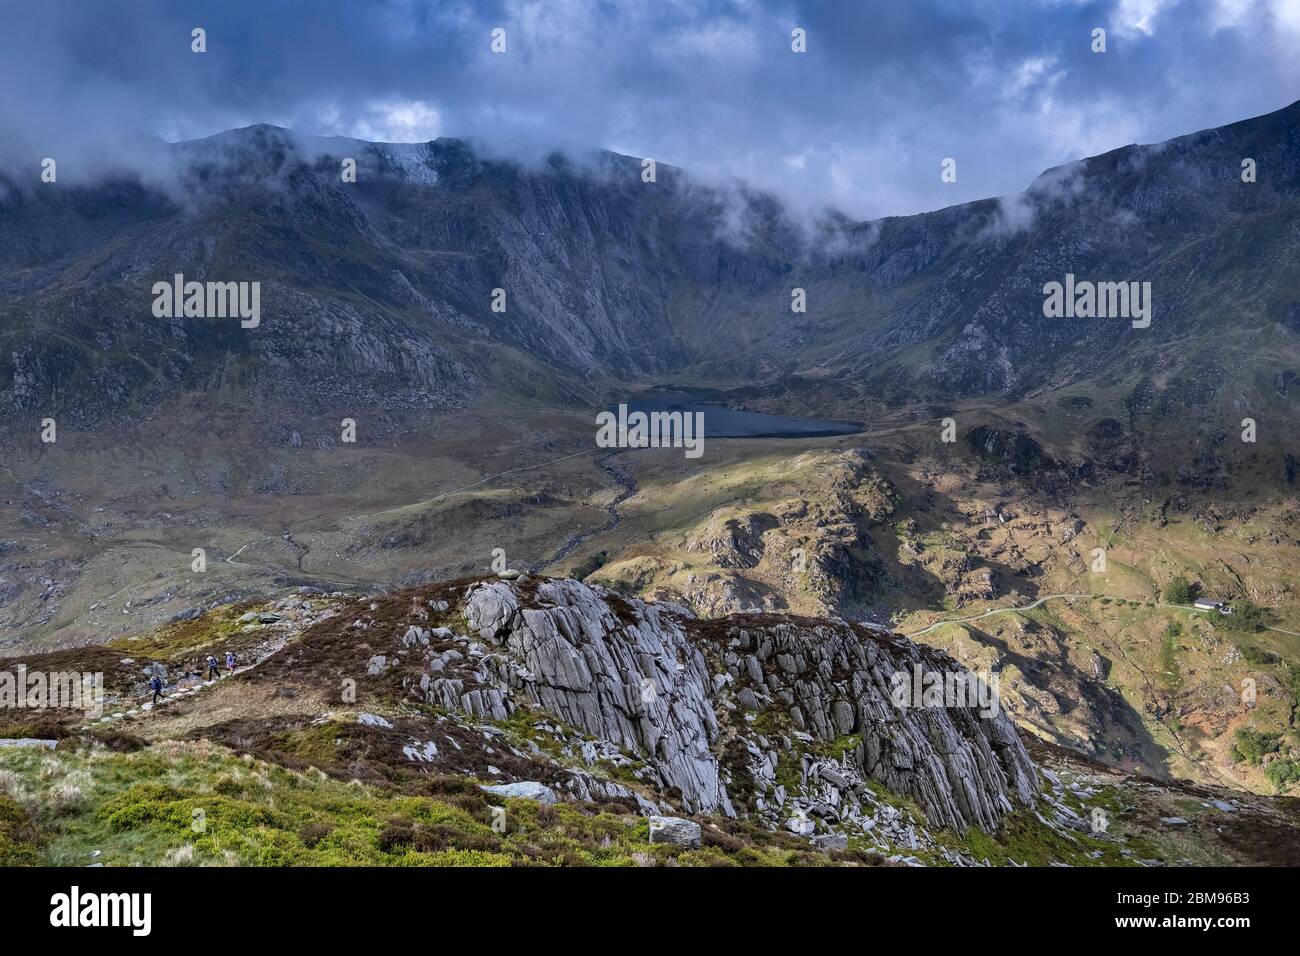 Walkers climbing Pen yr Ole Wen backed by Cwm Idwal and Glyder Fawr, Snowdonia National Park, North Wales, UK Stock Photo